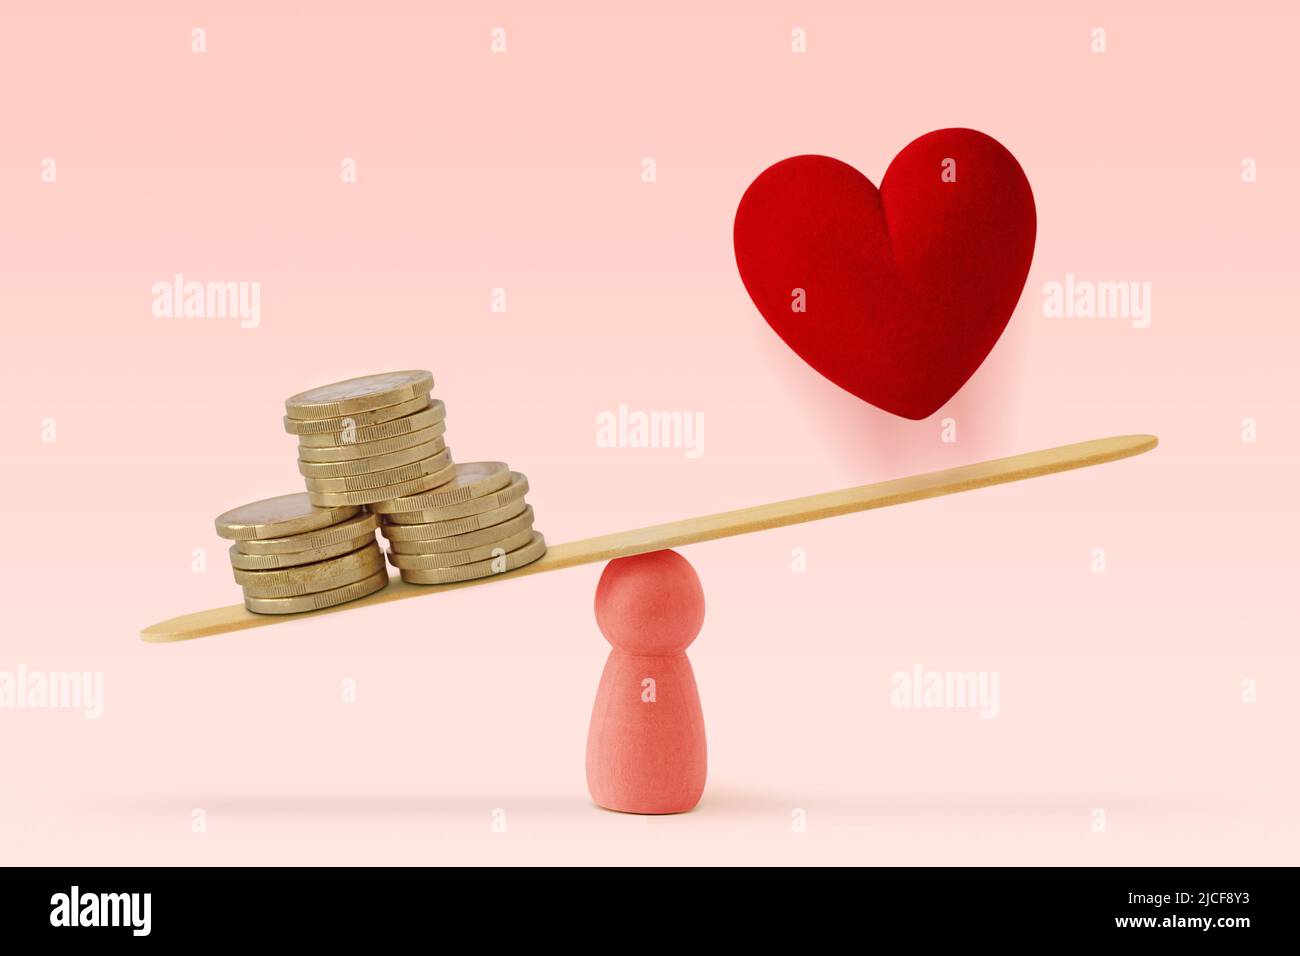 Money and heart on scale on pink background- Concept of woman and money priority over love in life Stock Photo